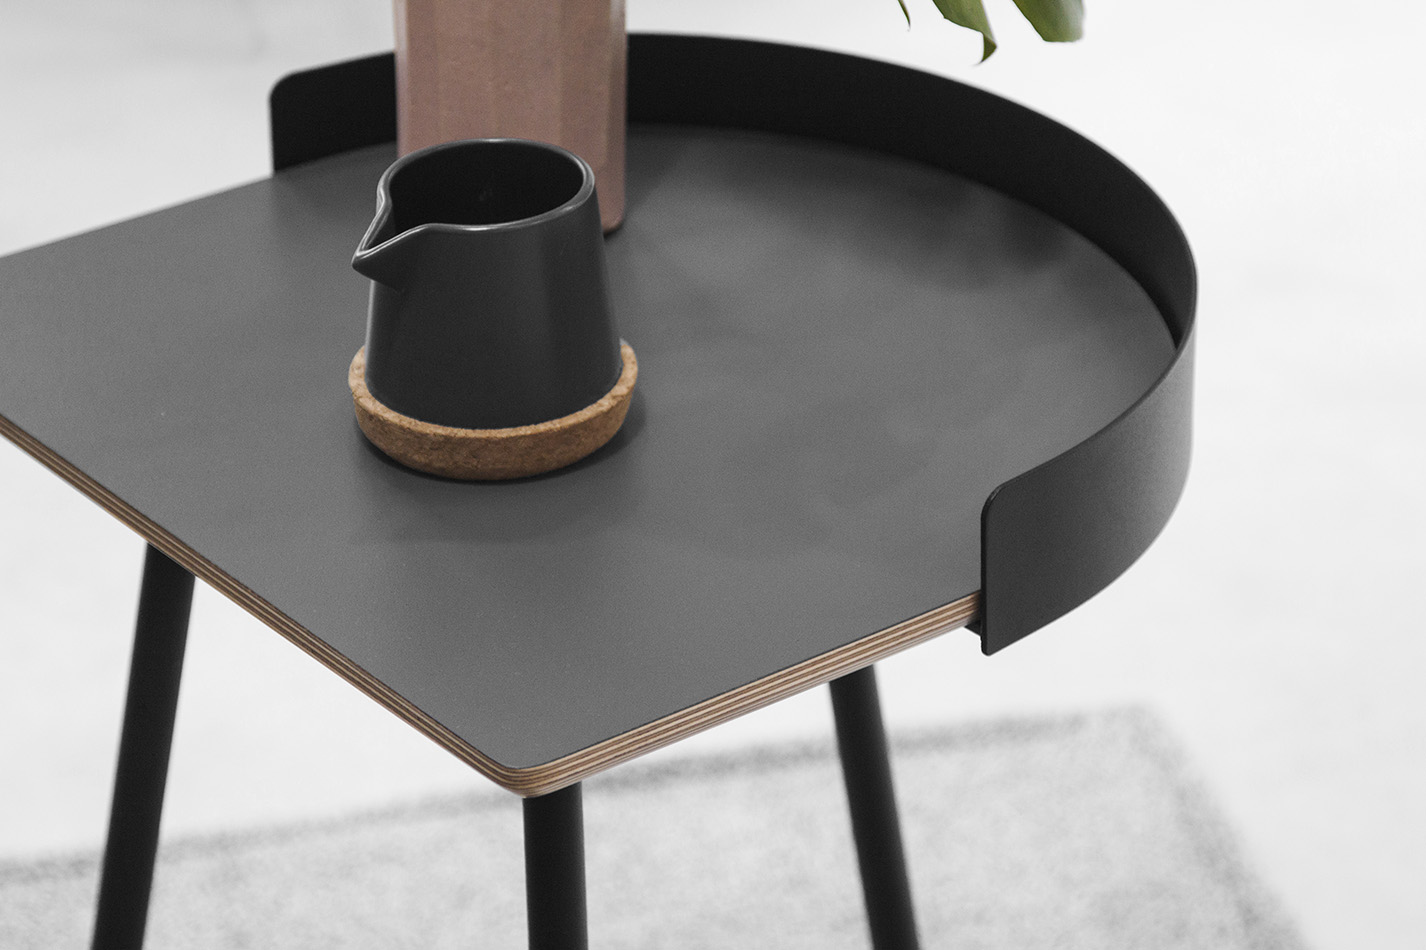 Side table made by Clean Touch Anti-Fingerprint laminate